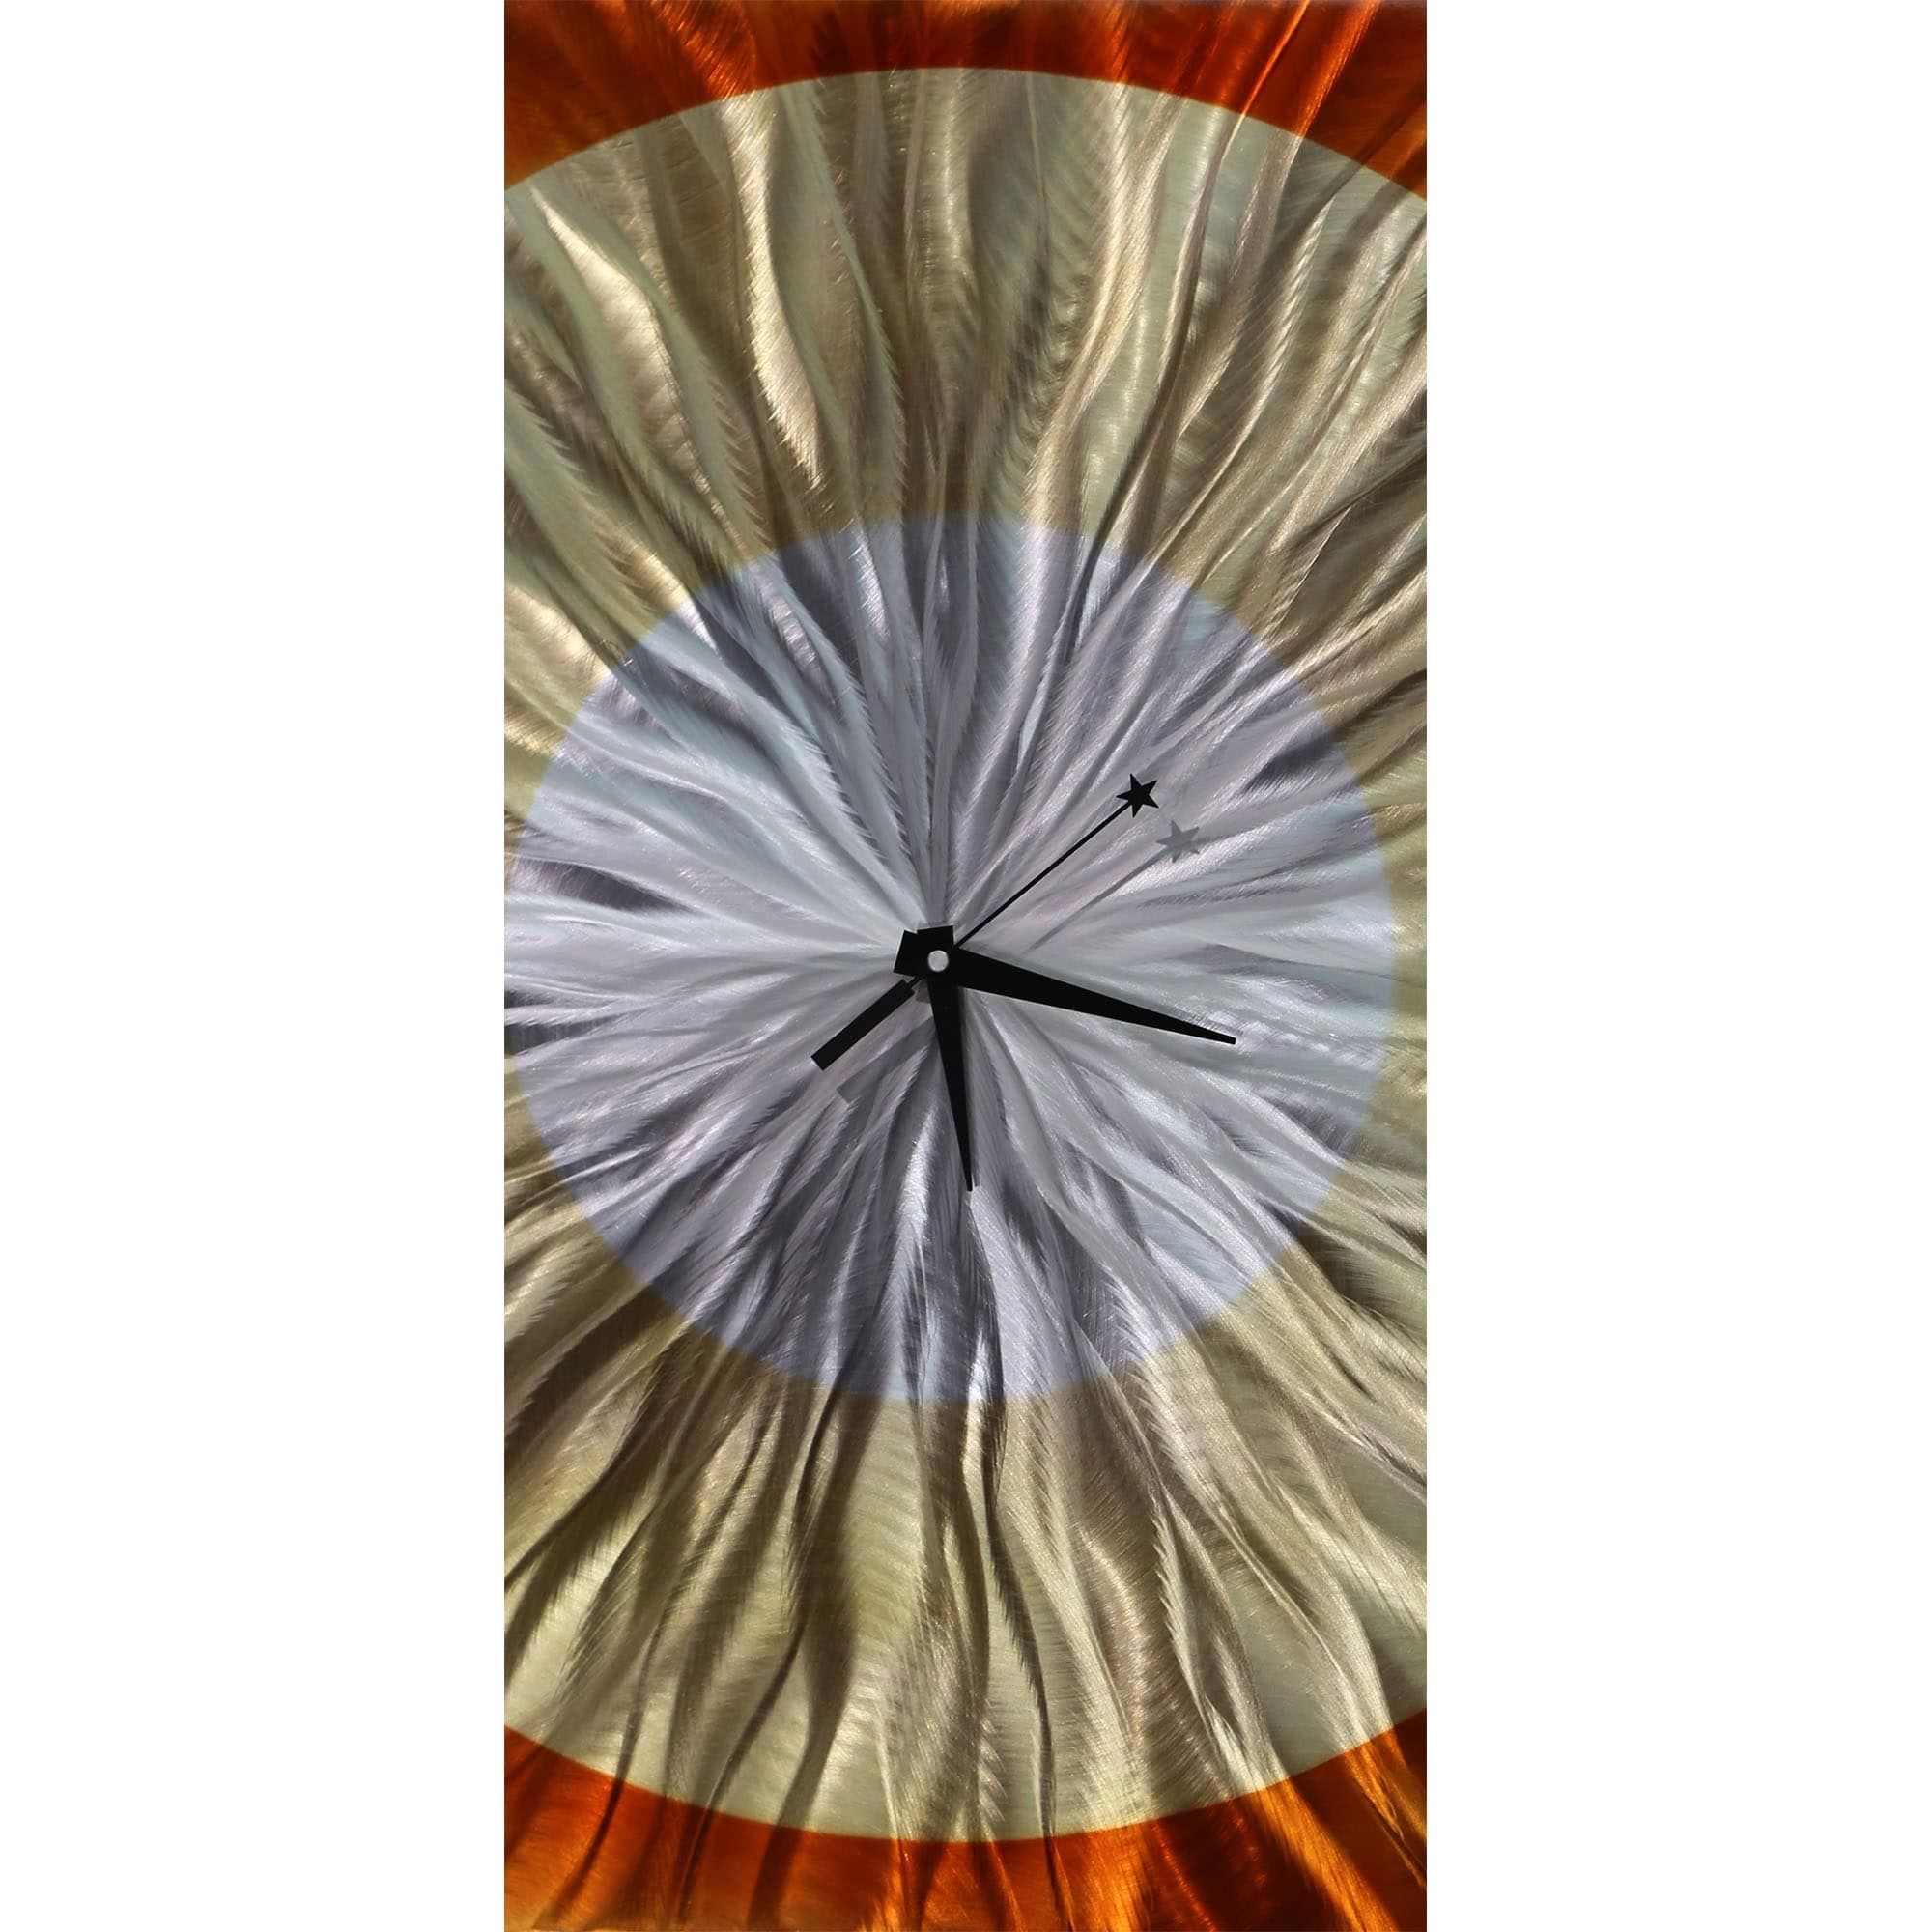 Statements2000 Metal Wall Clock Art Copper Gold Decor In Amber Dusk Wall Art (View 15 of 15)